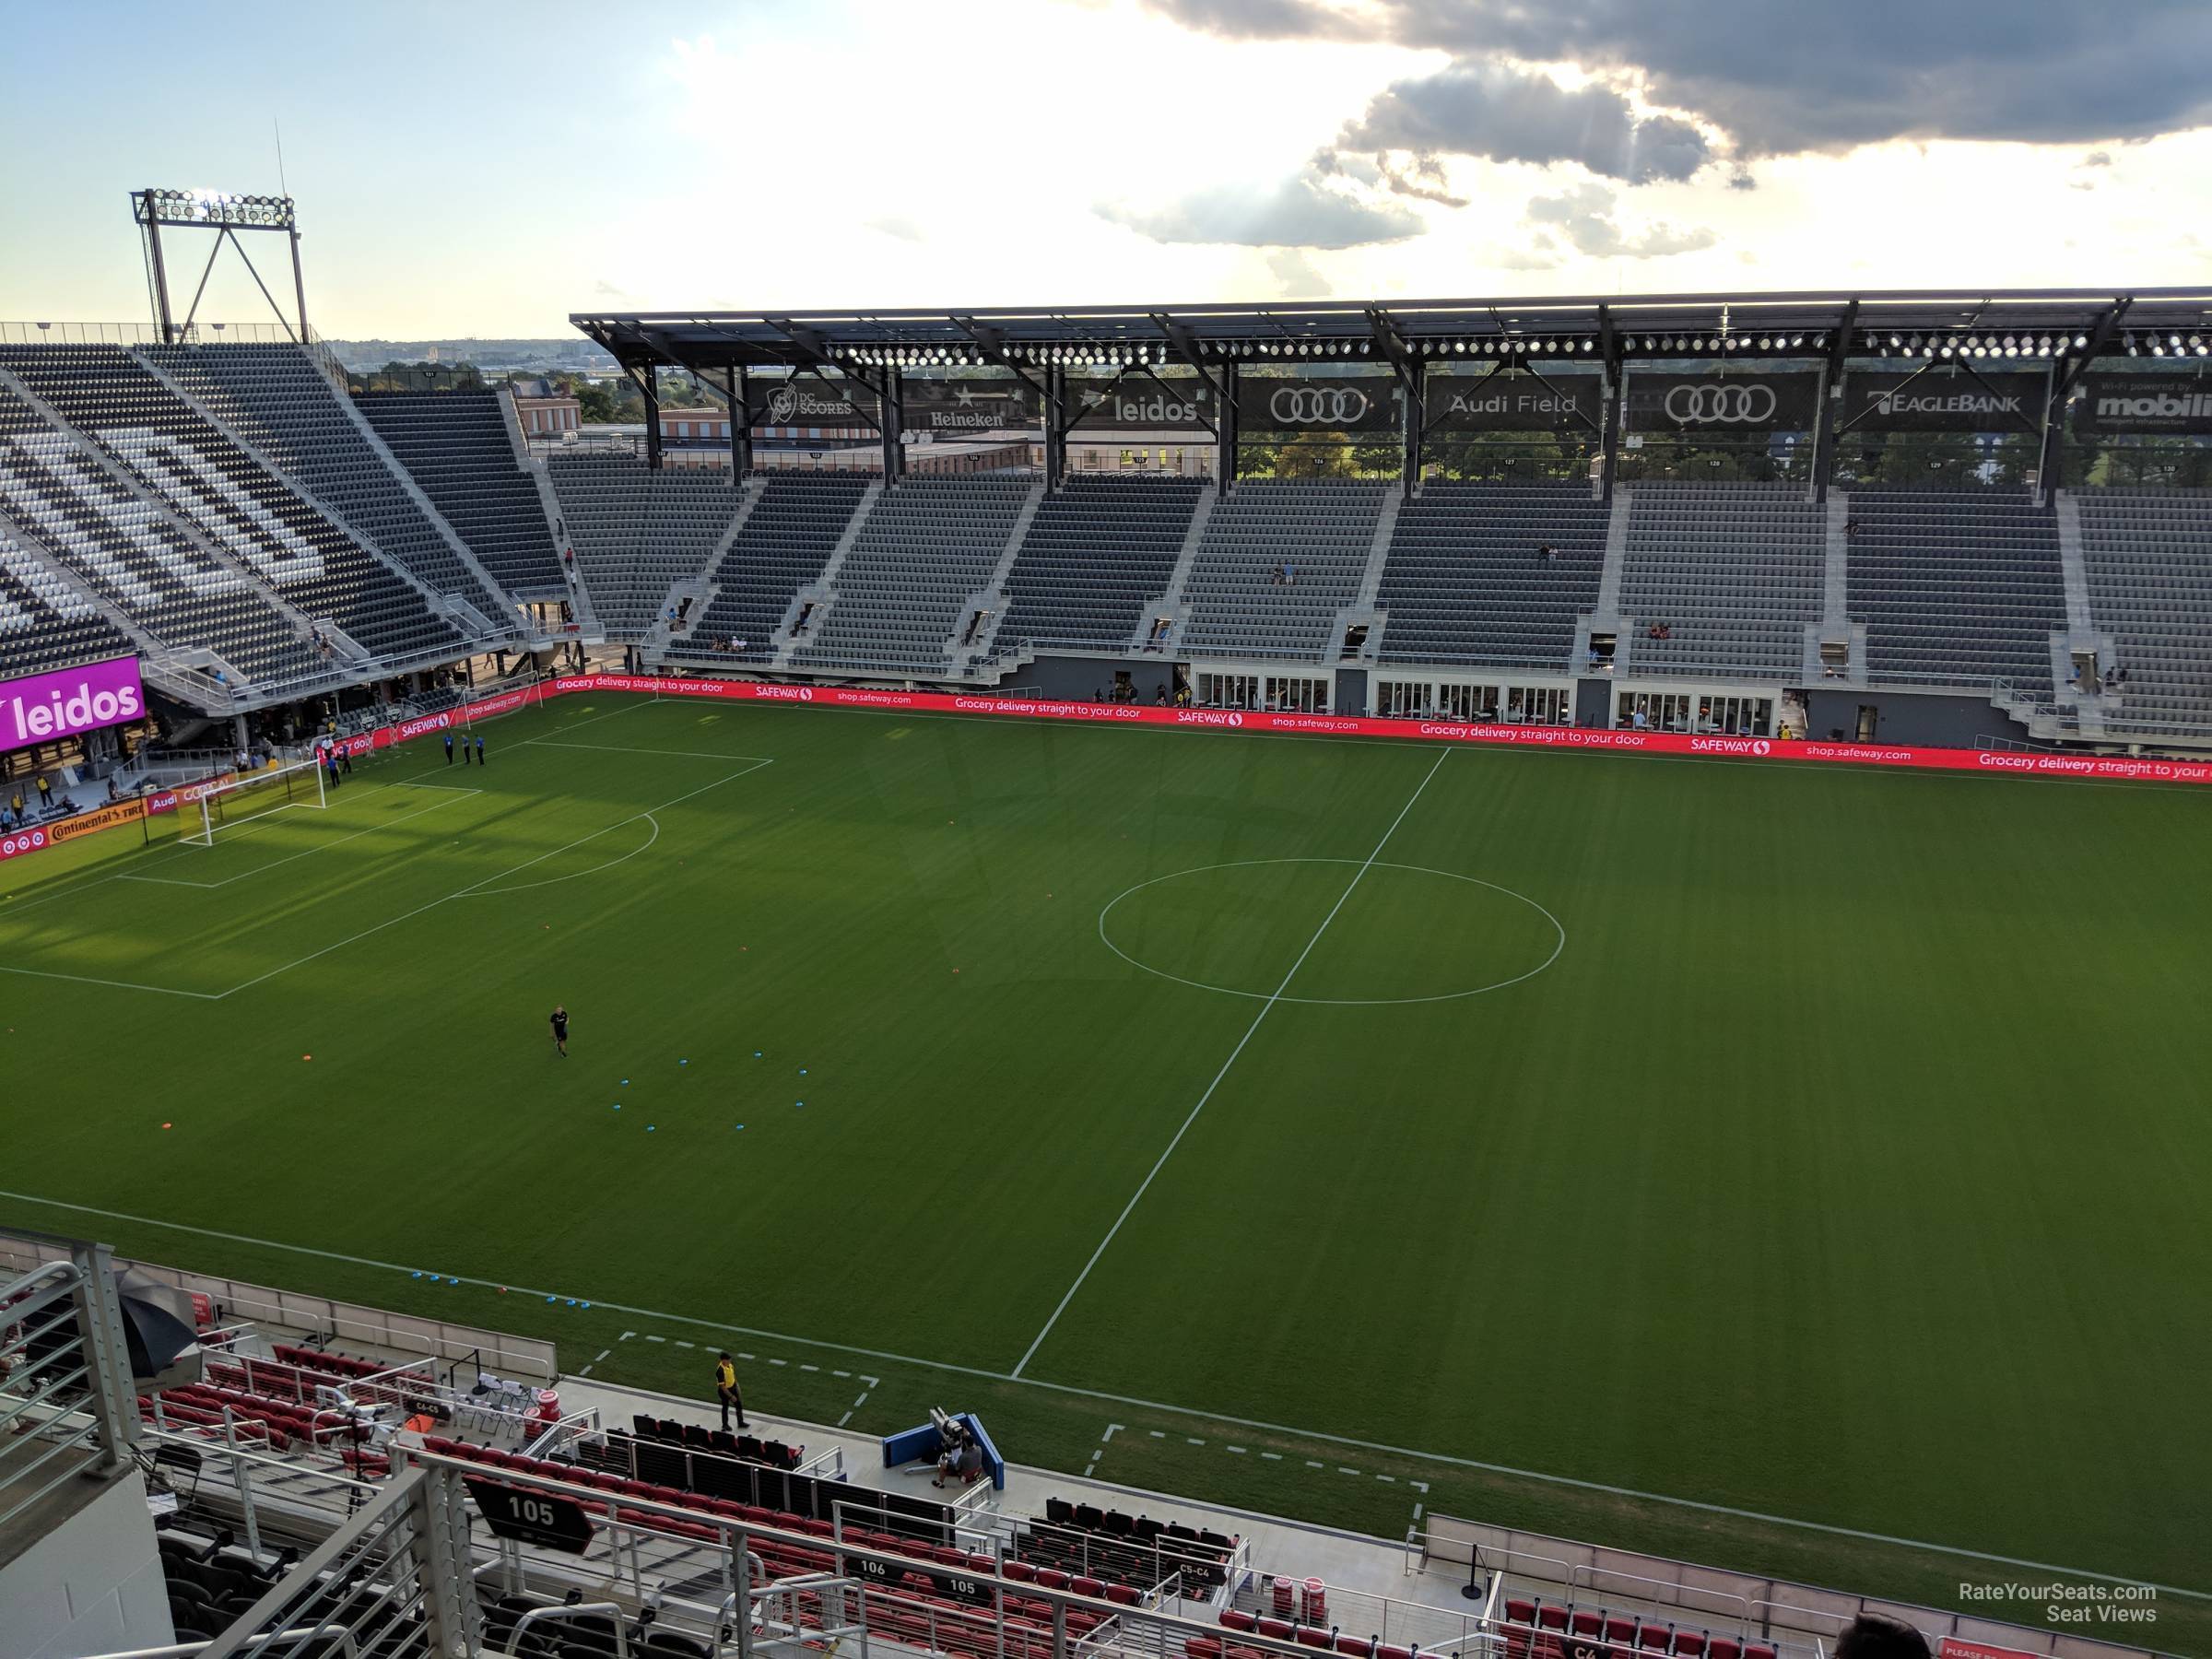 section 205, row 6 seat view  - audi field